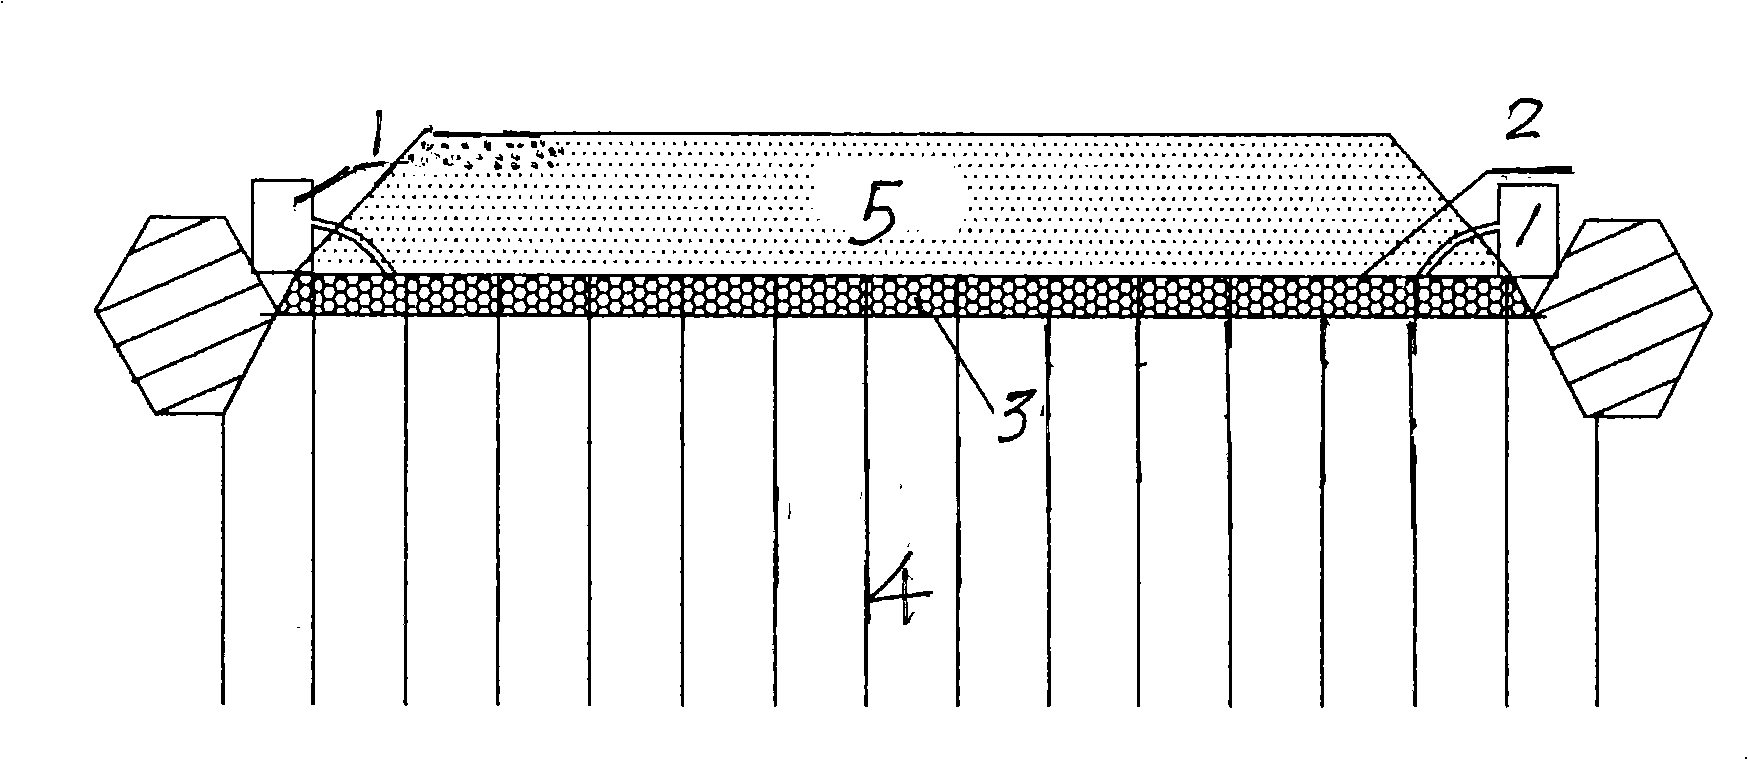 Technical method for reinforcing foundation by circulating bedding course drainage preloading